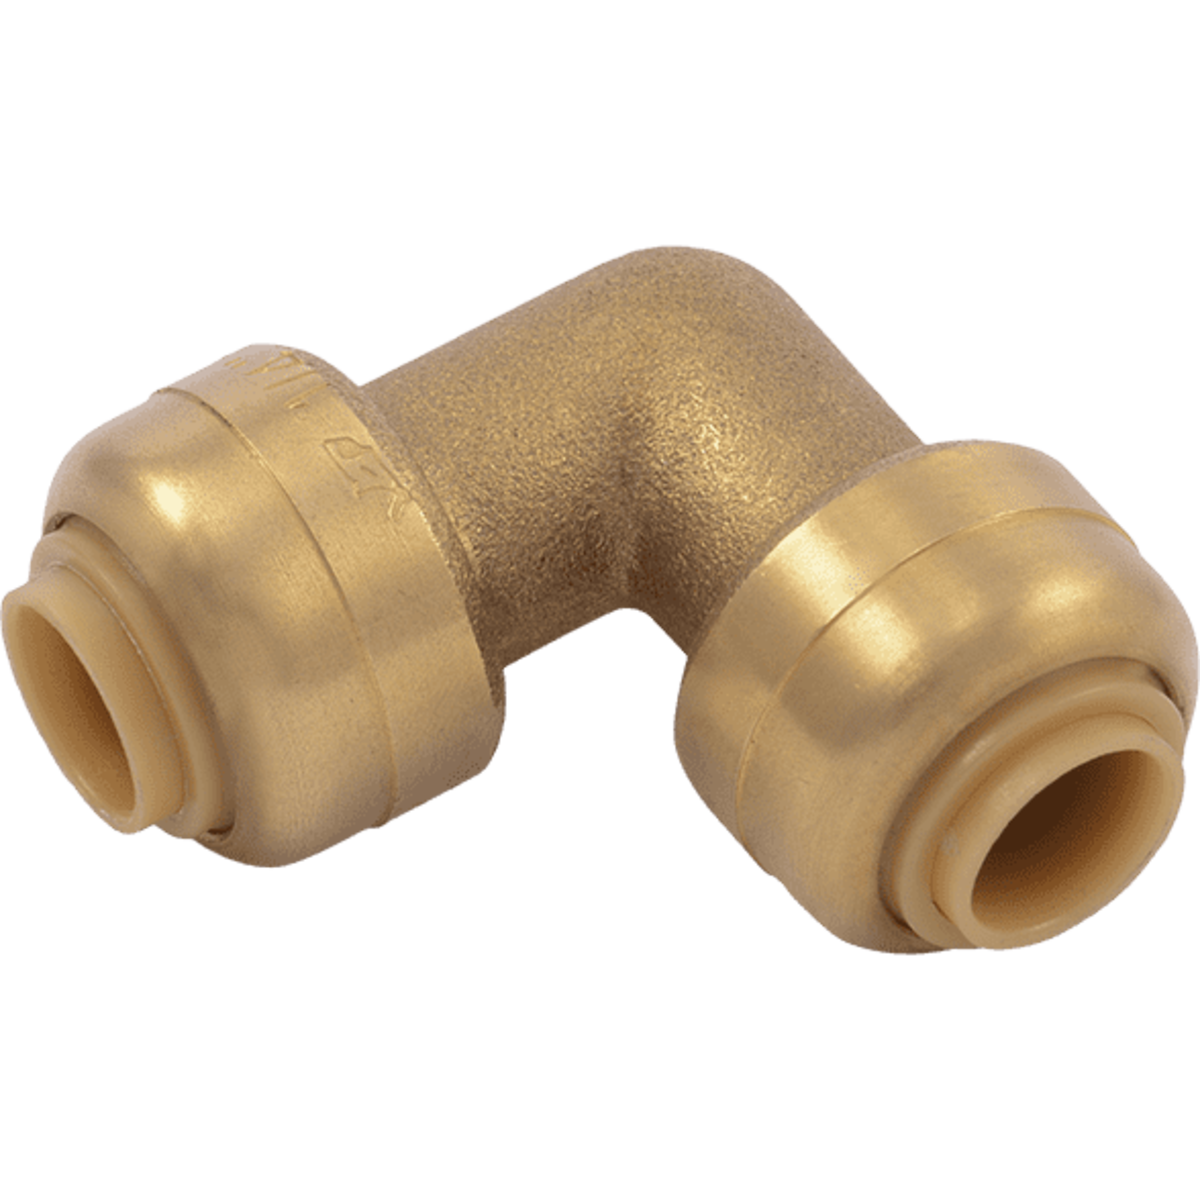 TEE 15MM  COMPRESSION FITTINGS ELBOW COUPLING STOP END,REDUCERS,COPPER PIPE 